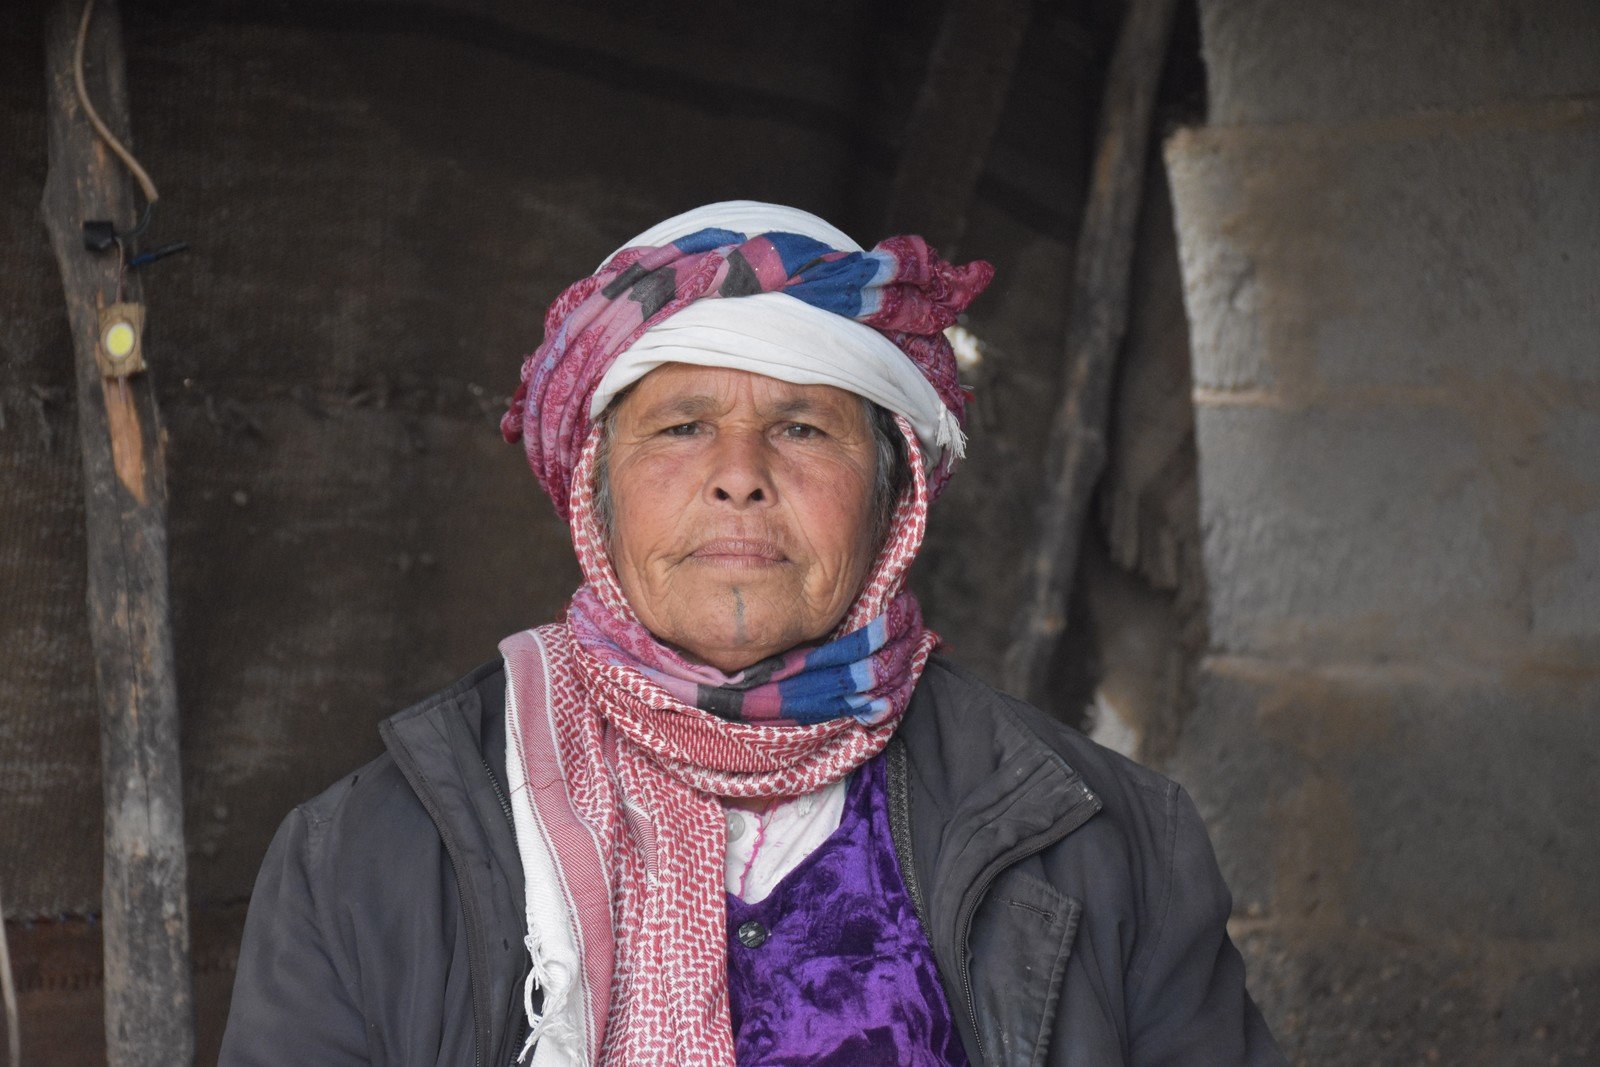 Wadha, who lives in Deir Ez-Zor, is one of many people benefiting from Oxfam’s cash-for-work intervention. It helps Syrians get back on their feet and provide for their families. (Photo: Dania Kareh / Oxfam)